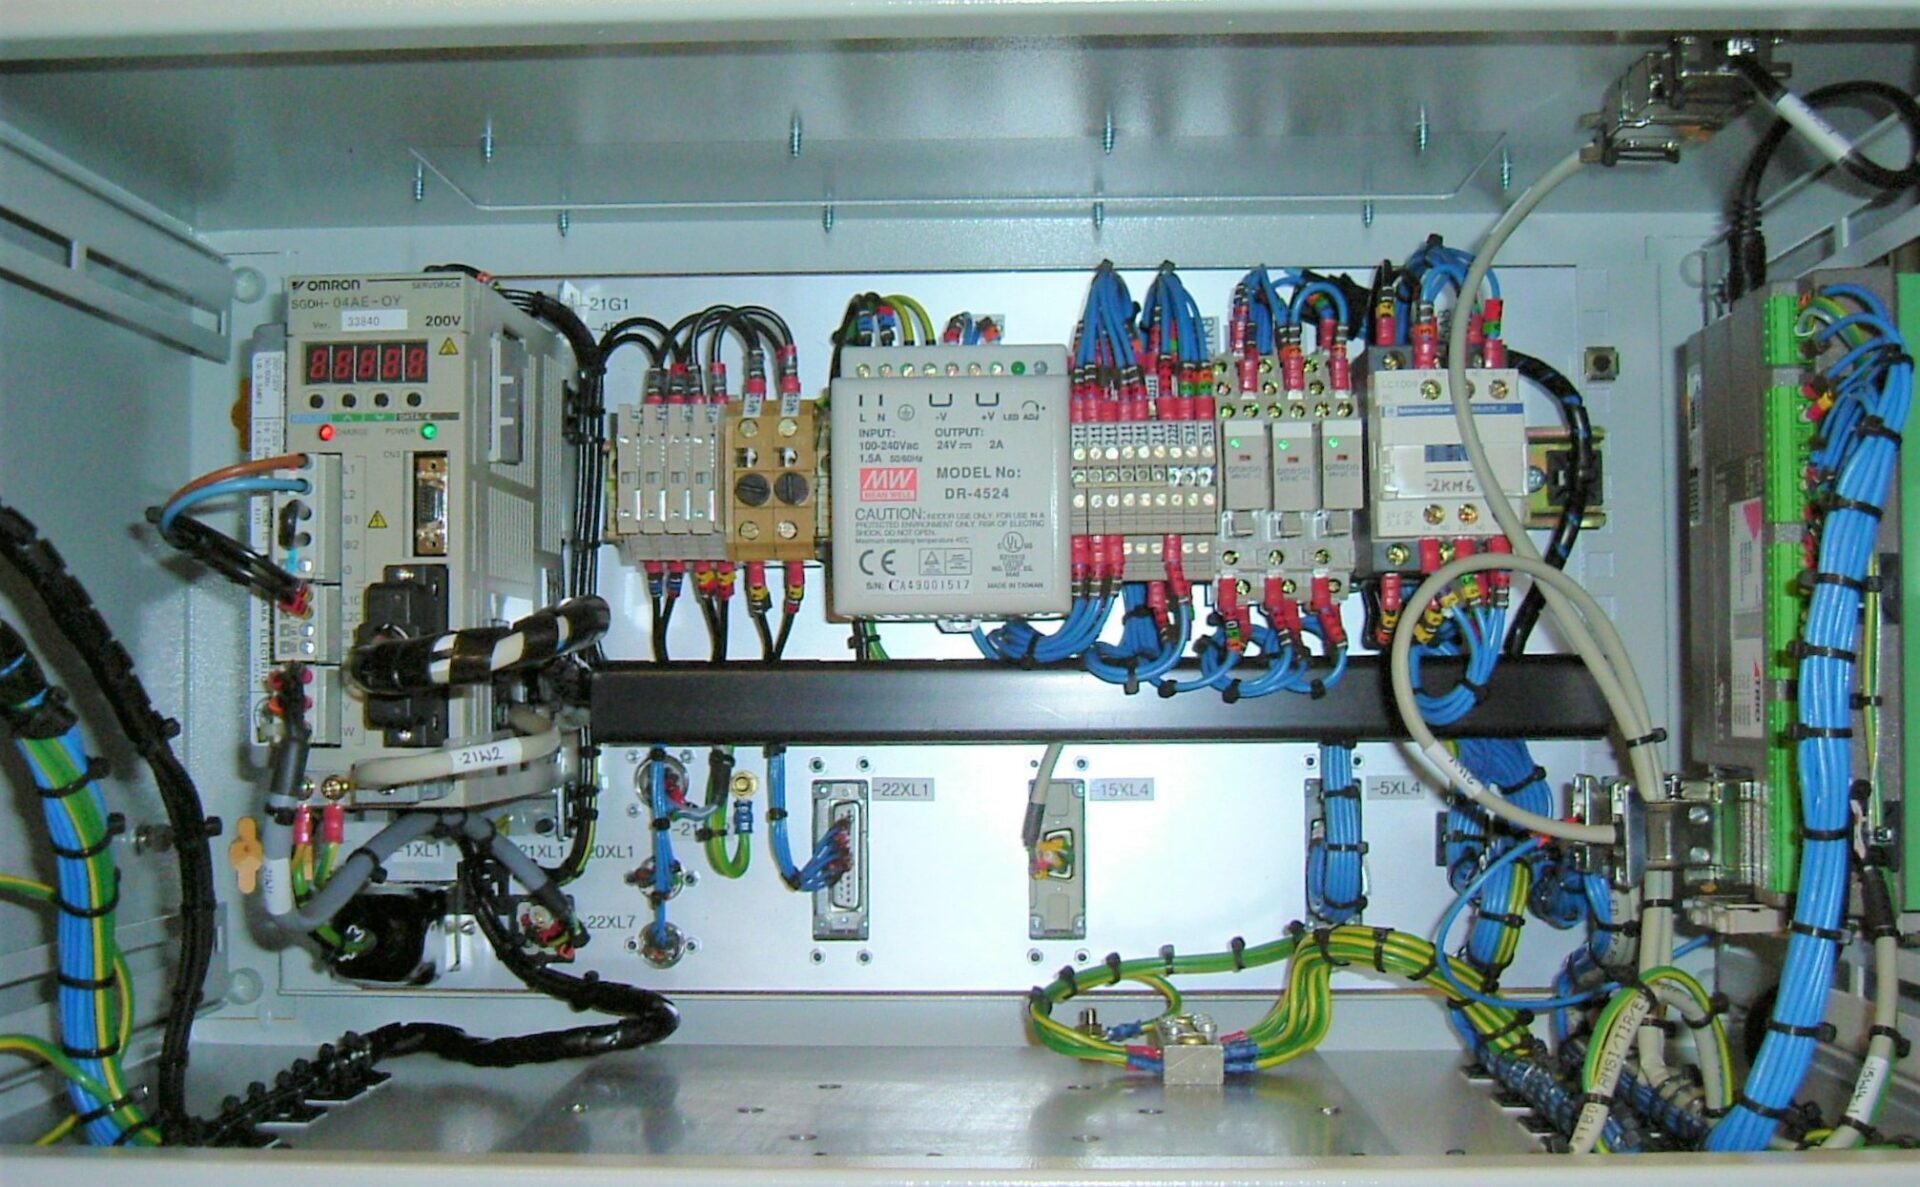 Manufacturers of Bespoke Industrial Control Panels, Cable Harnesses and PBC Assembly.